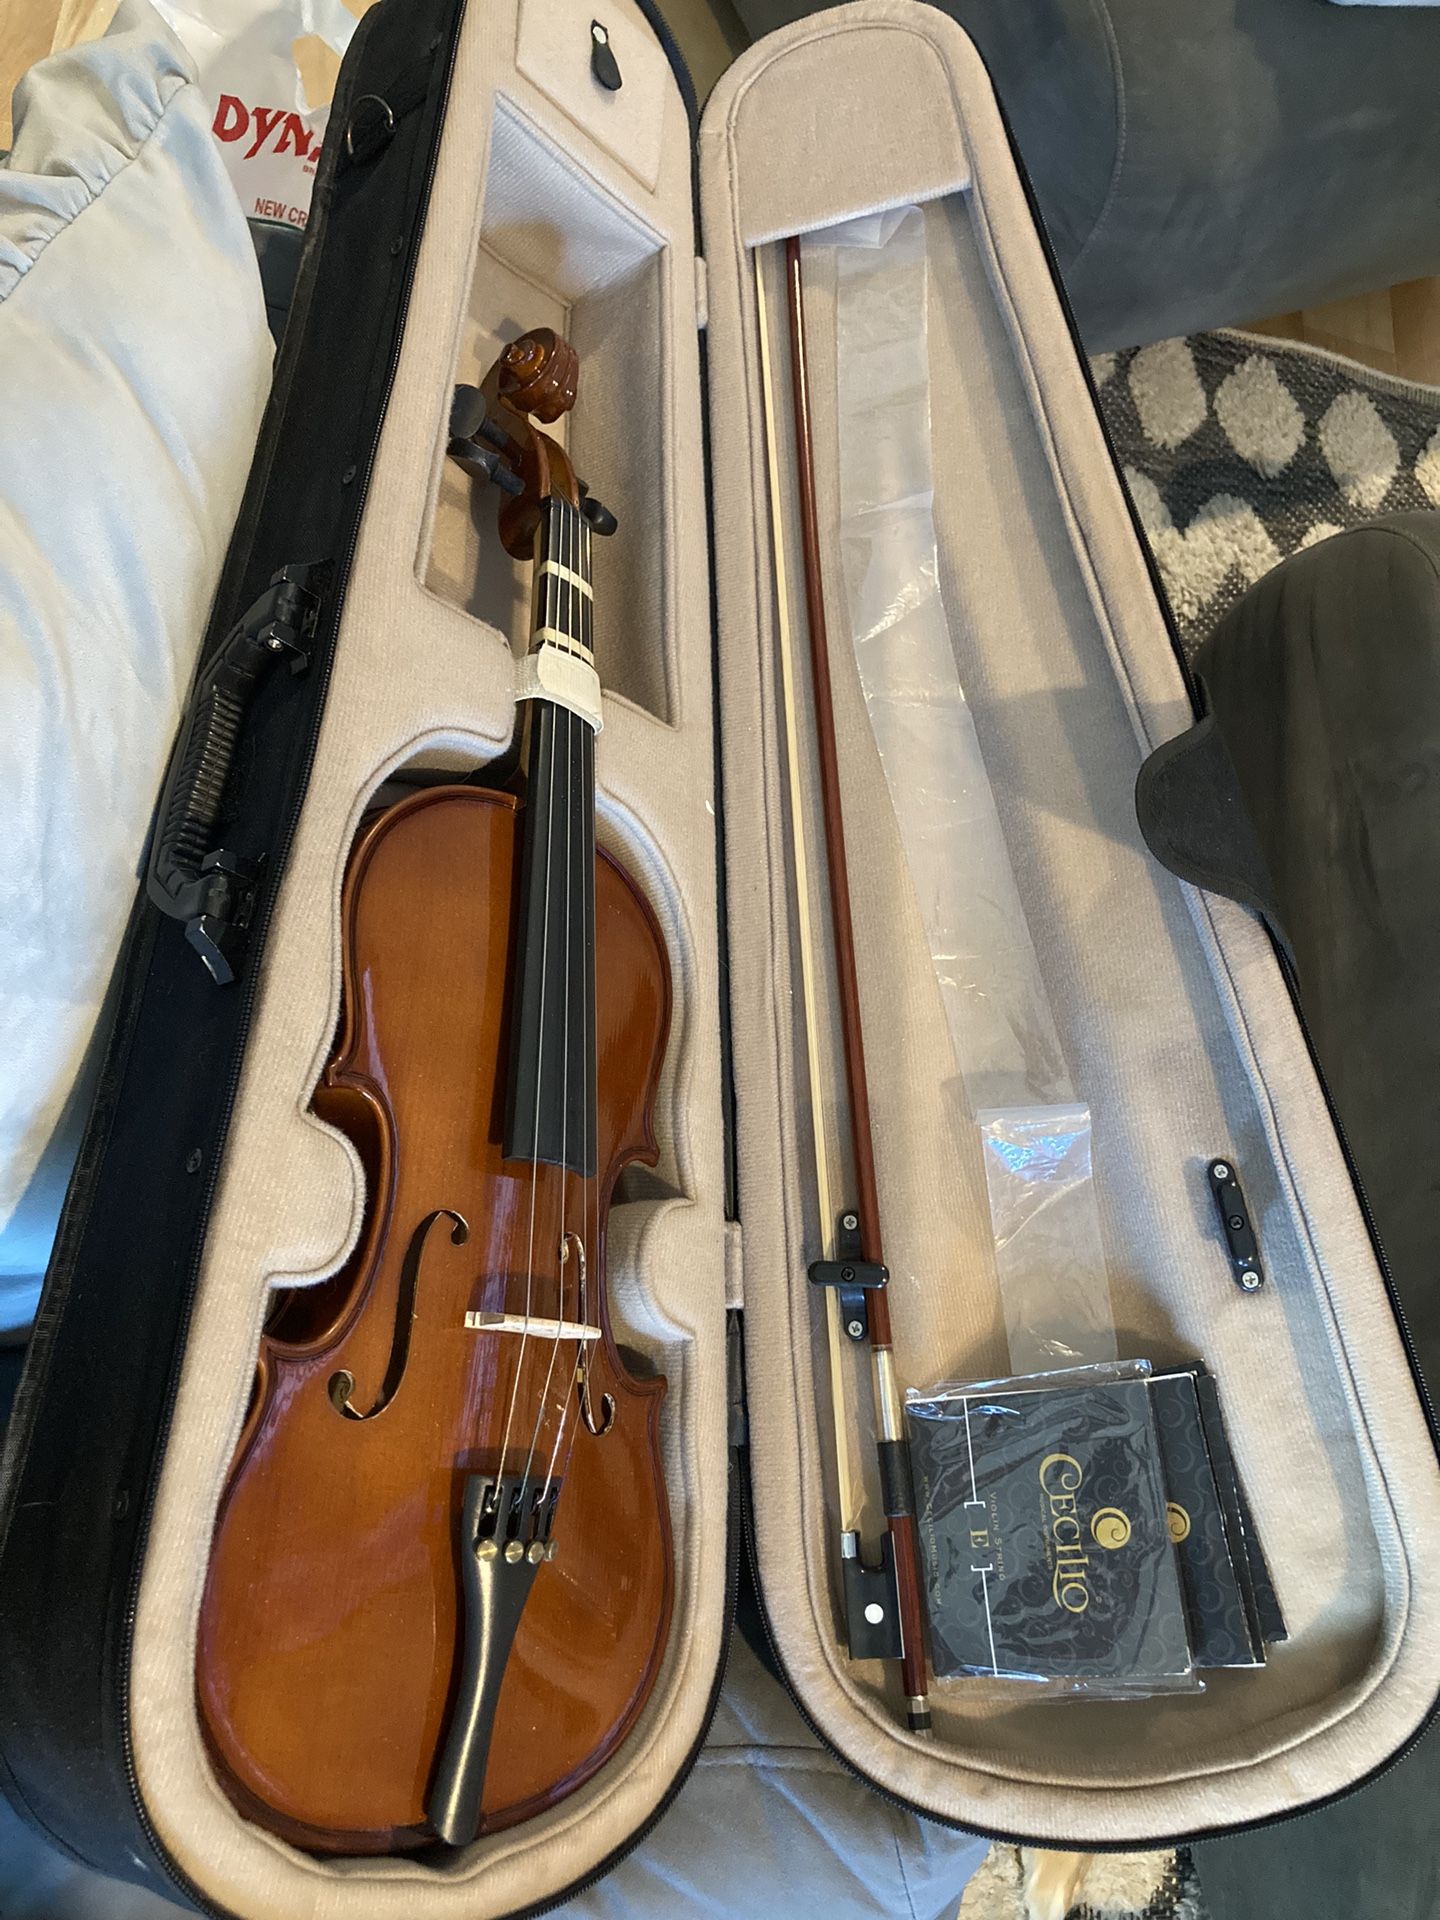 Used - Junior Violin for Kids 10-12 years old - size 3/4